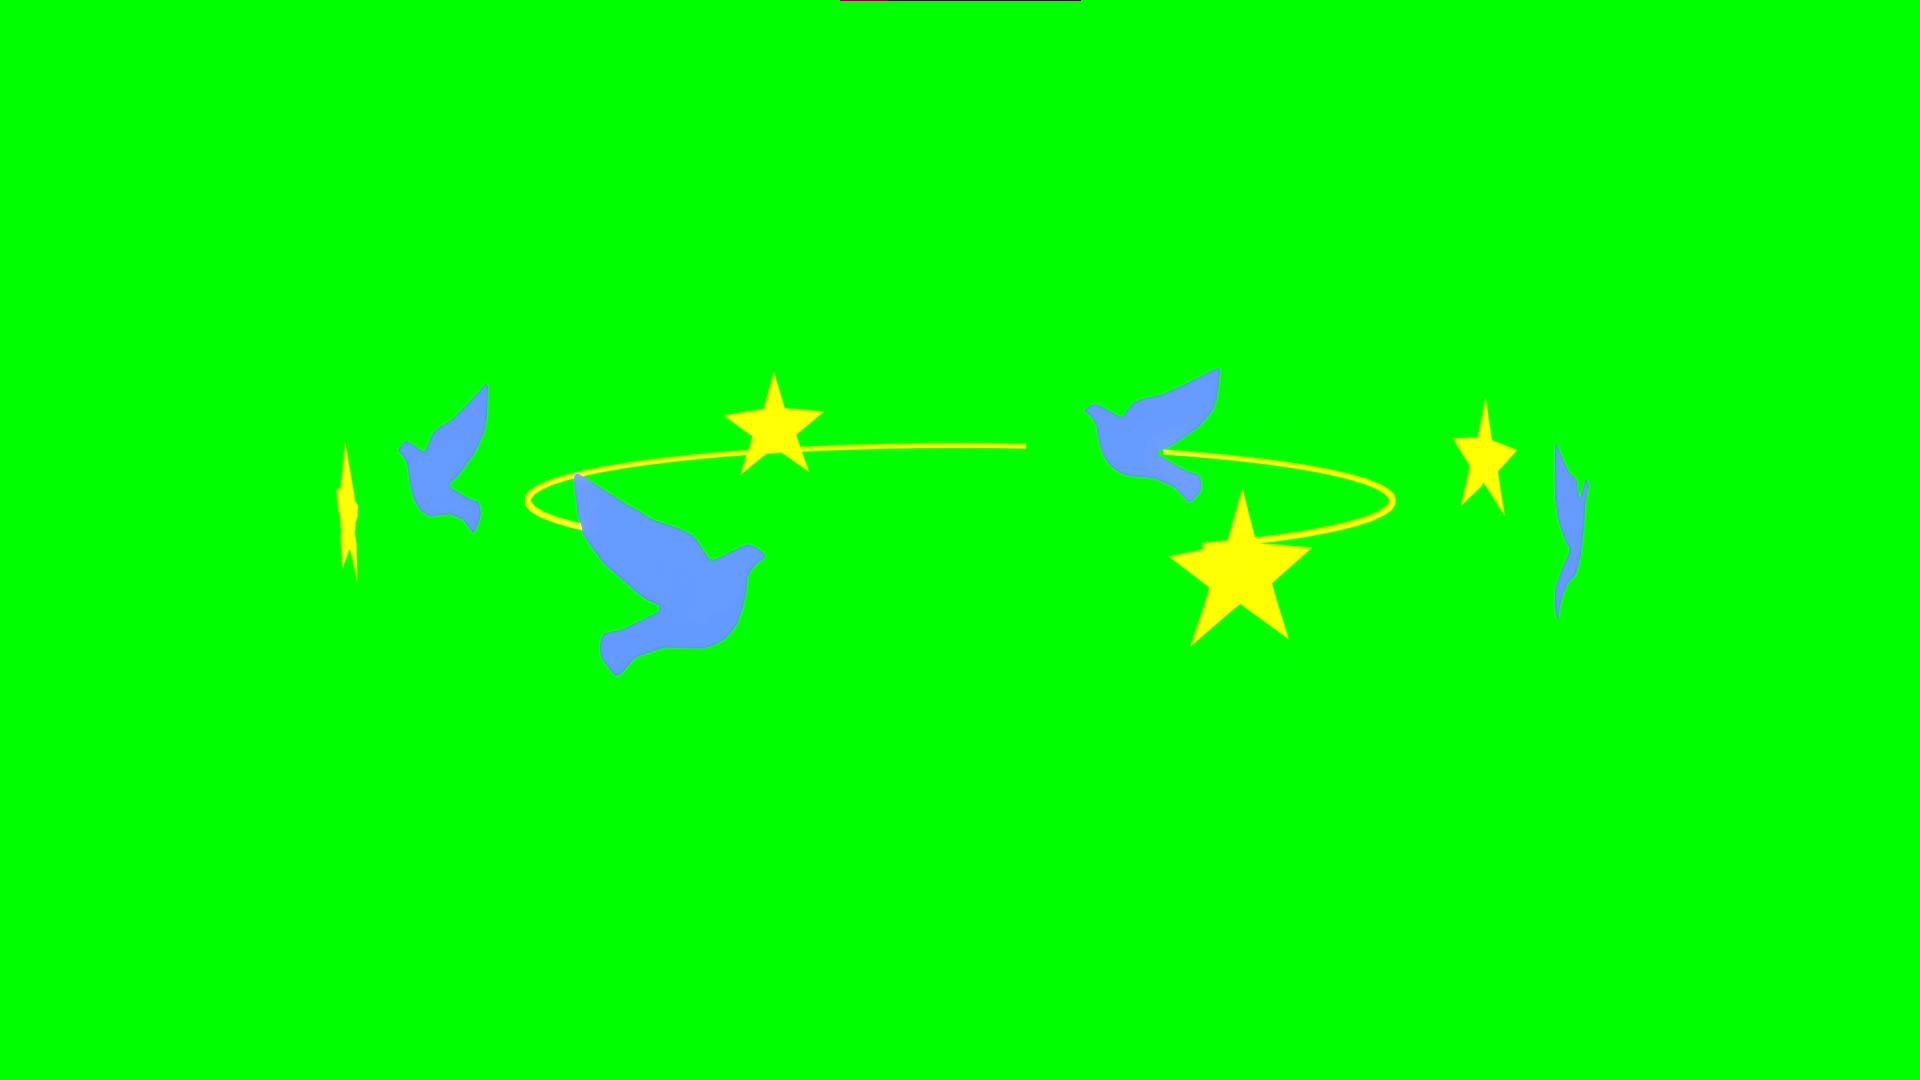 Dizzy Birds Chirping and Seeing Stars after falling effect (Green Screen)